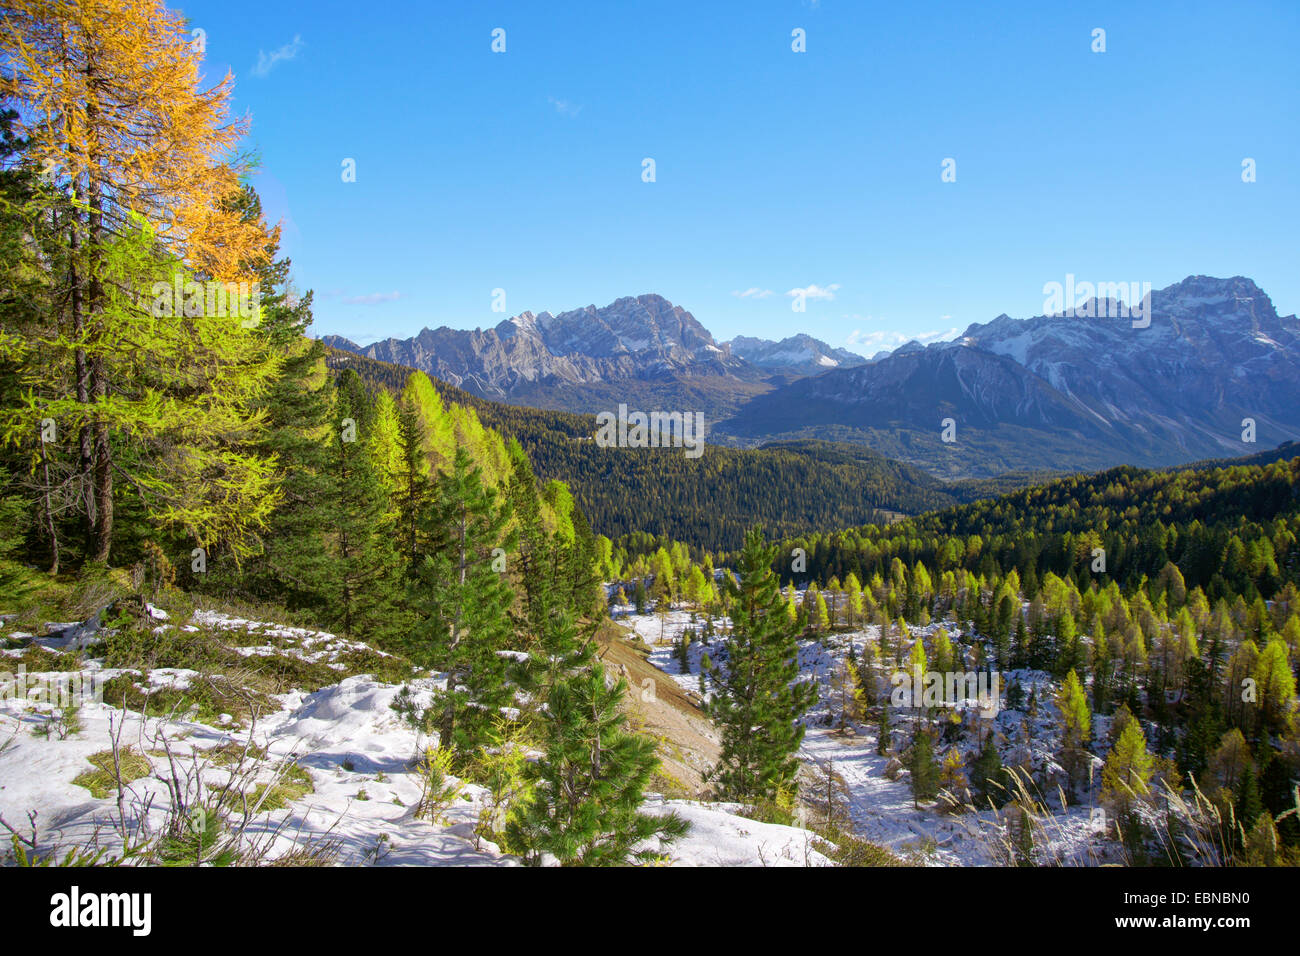 scenery of the Dolomite Alps in autumn, view onto the Pomagagnon group on the lest and on the Sorapiss group on the right, Germany, South Tyrol, Dolomiten Stock Photo